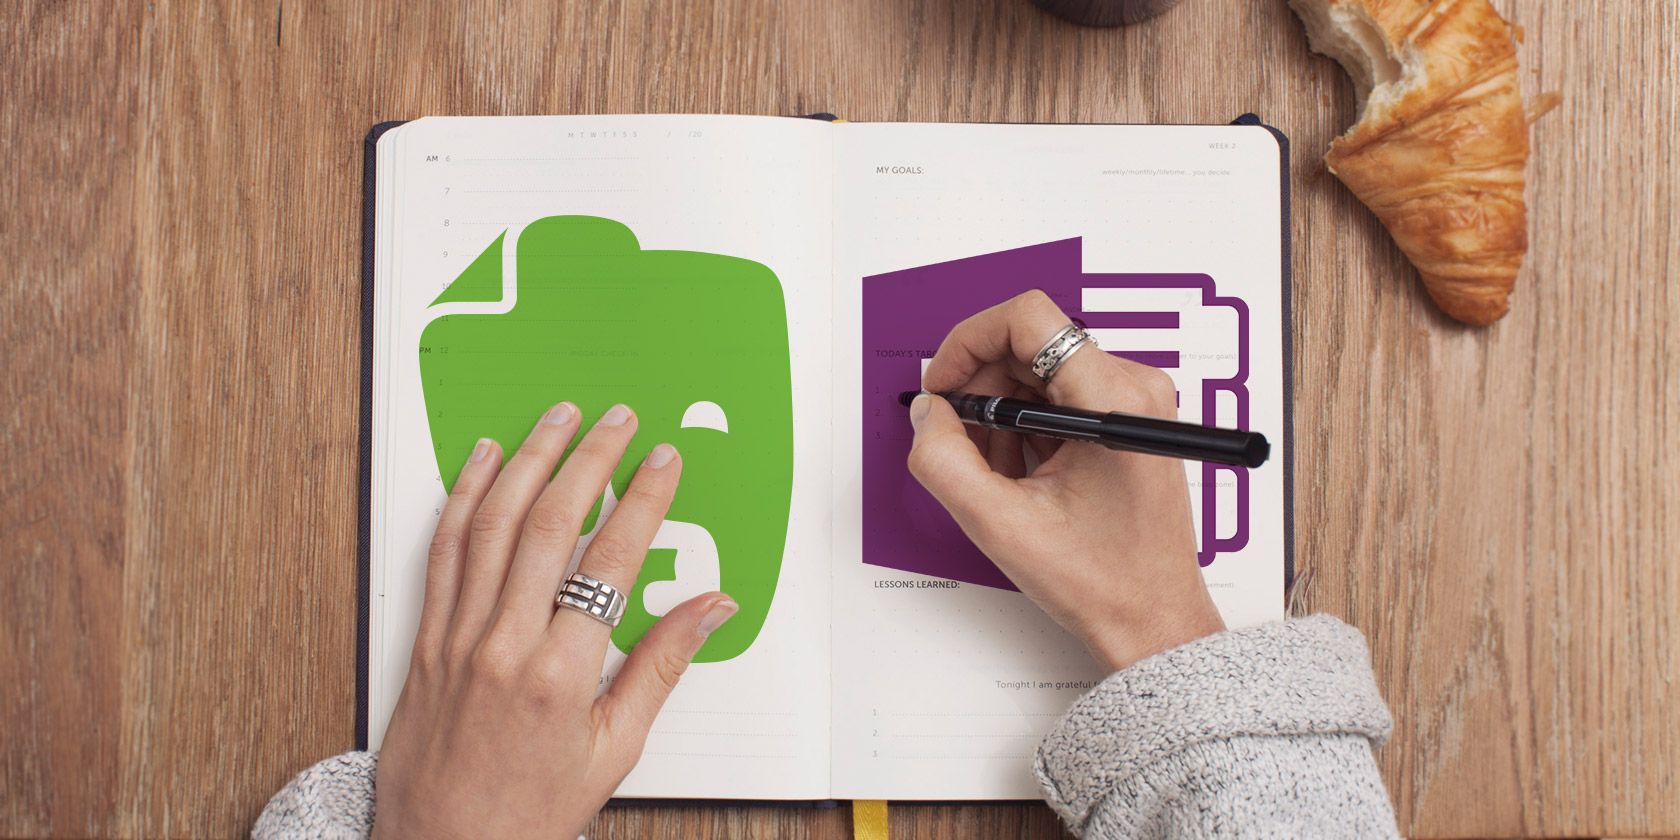 reasons-evernote-better-onenote